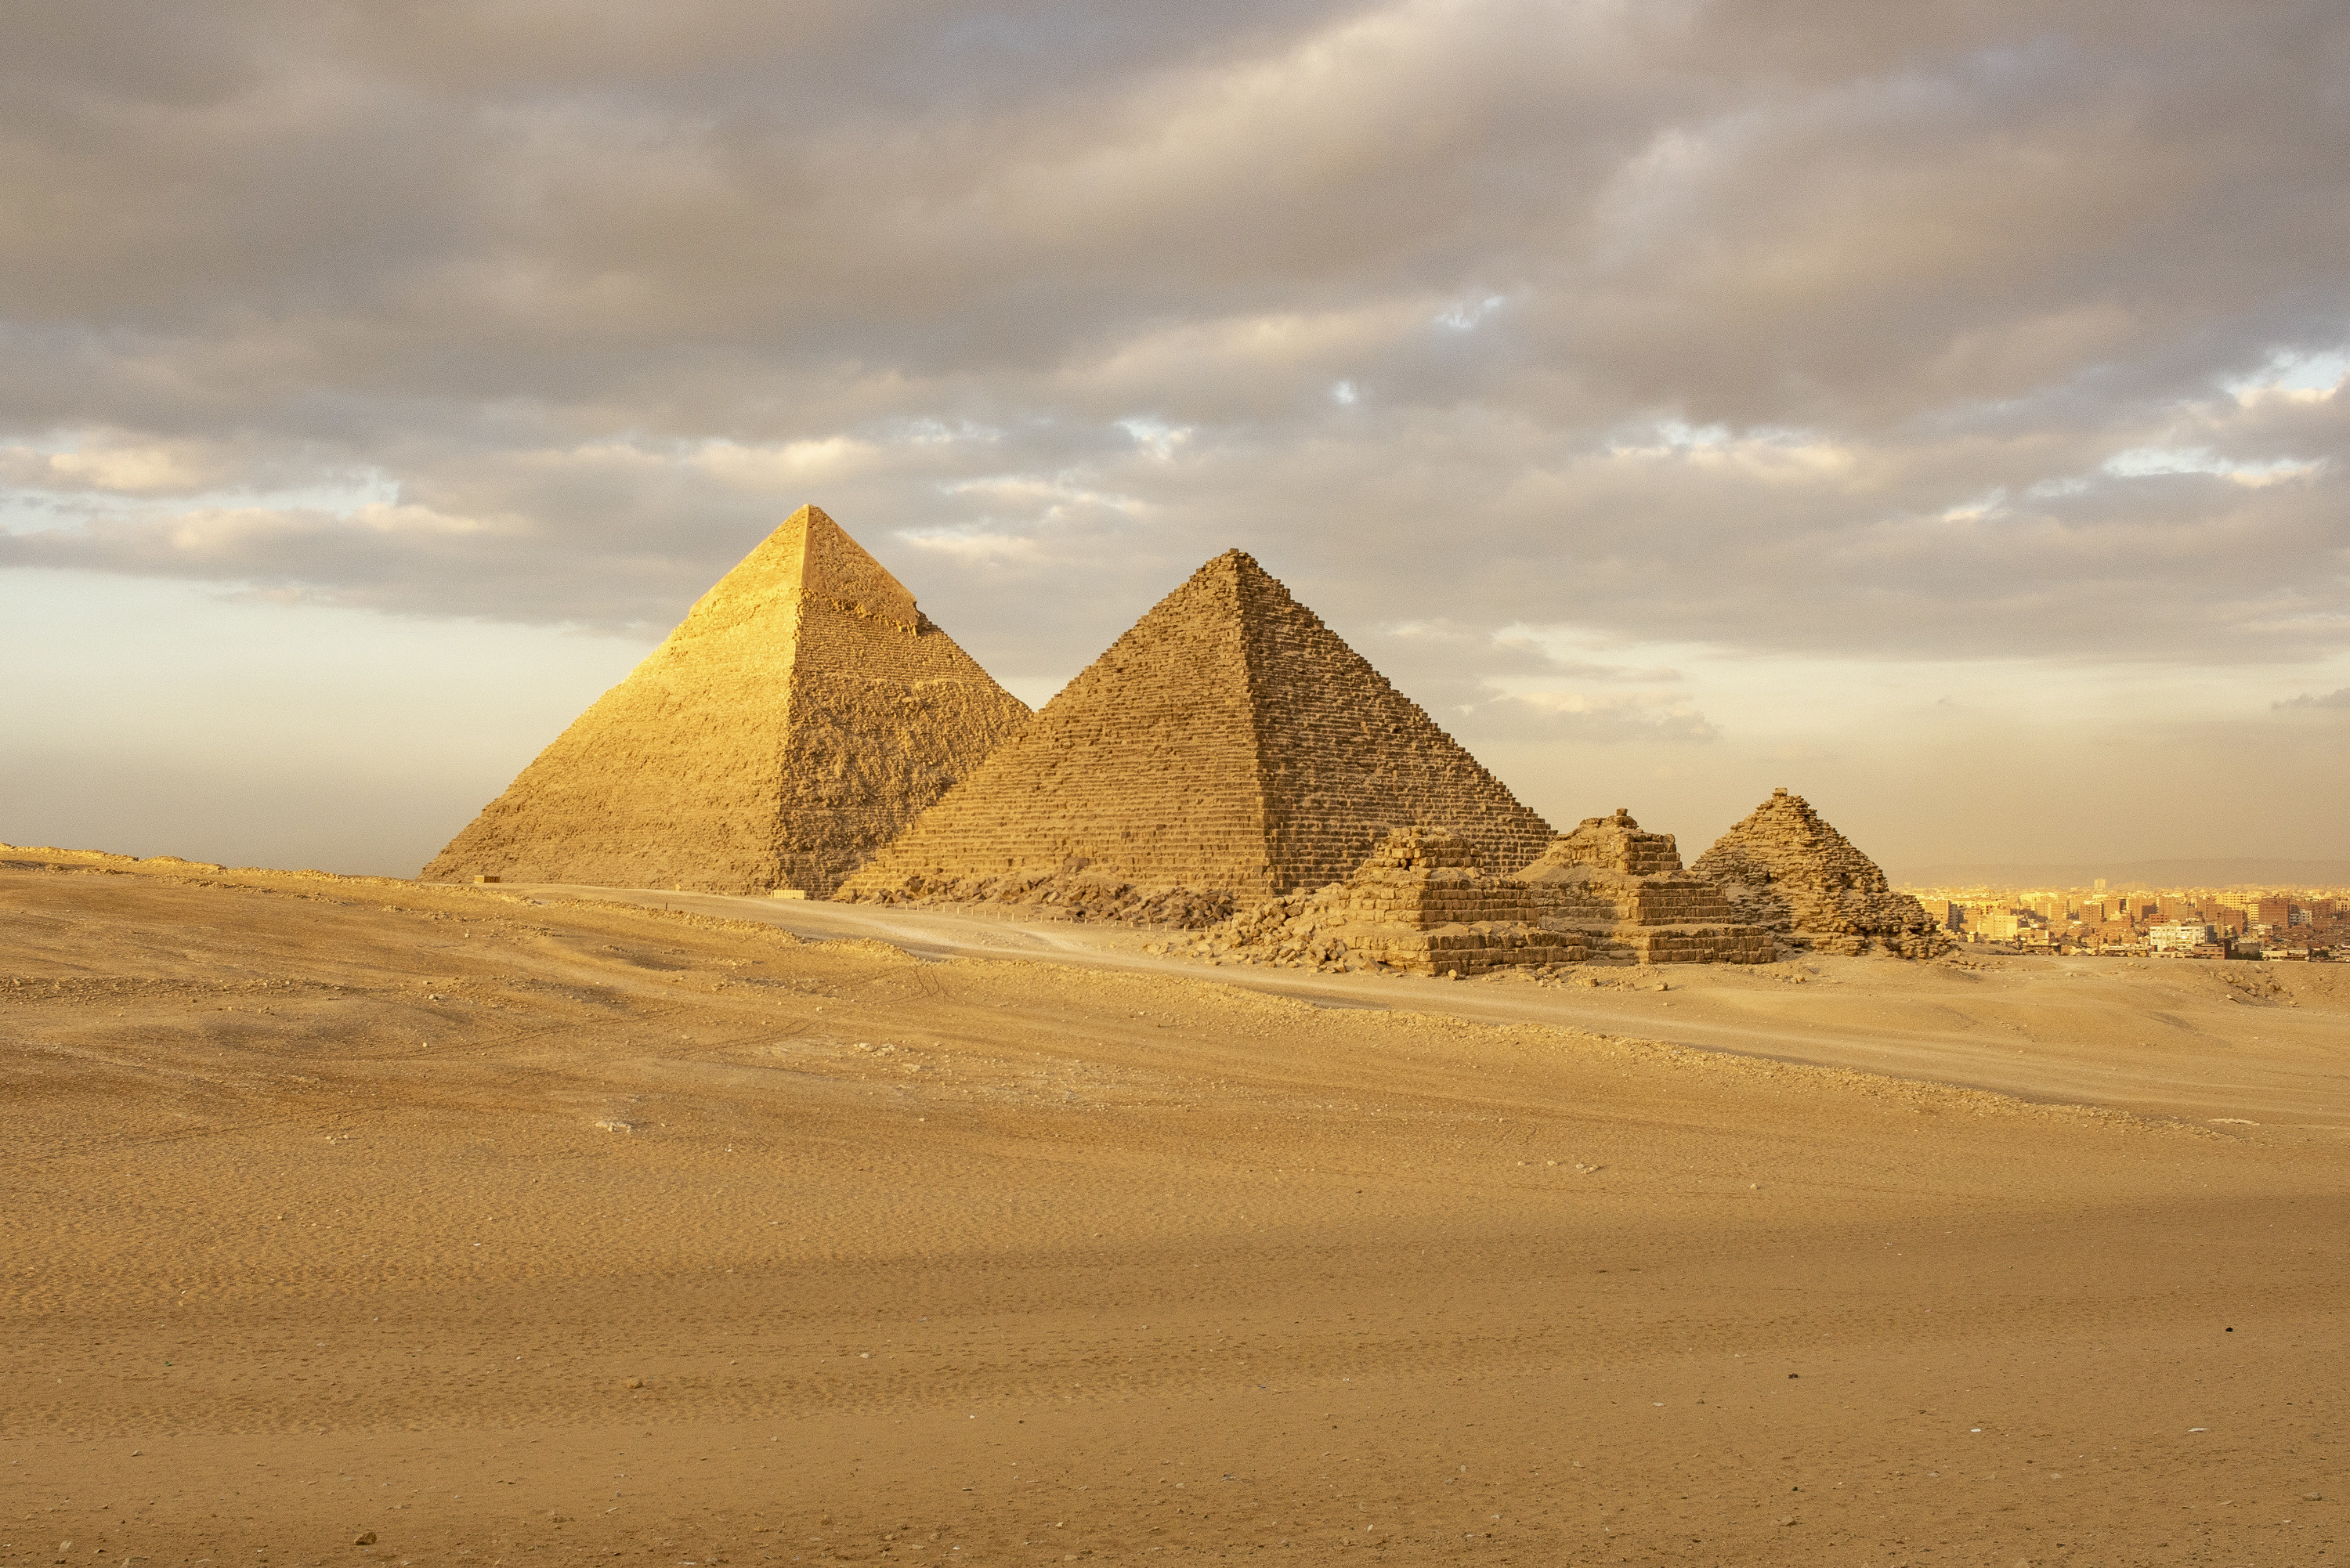 Two large pyramids and smaller ones amid sand